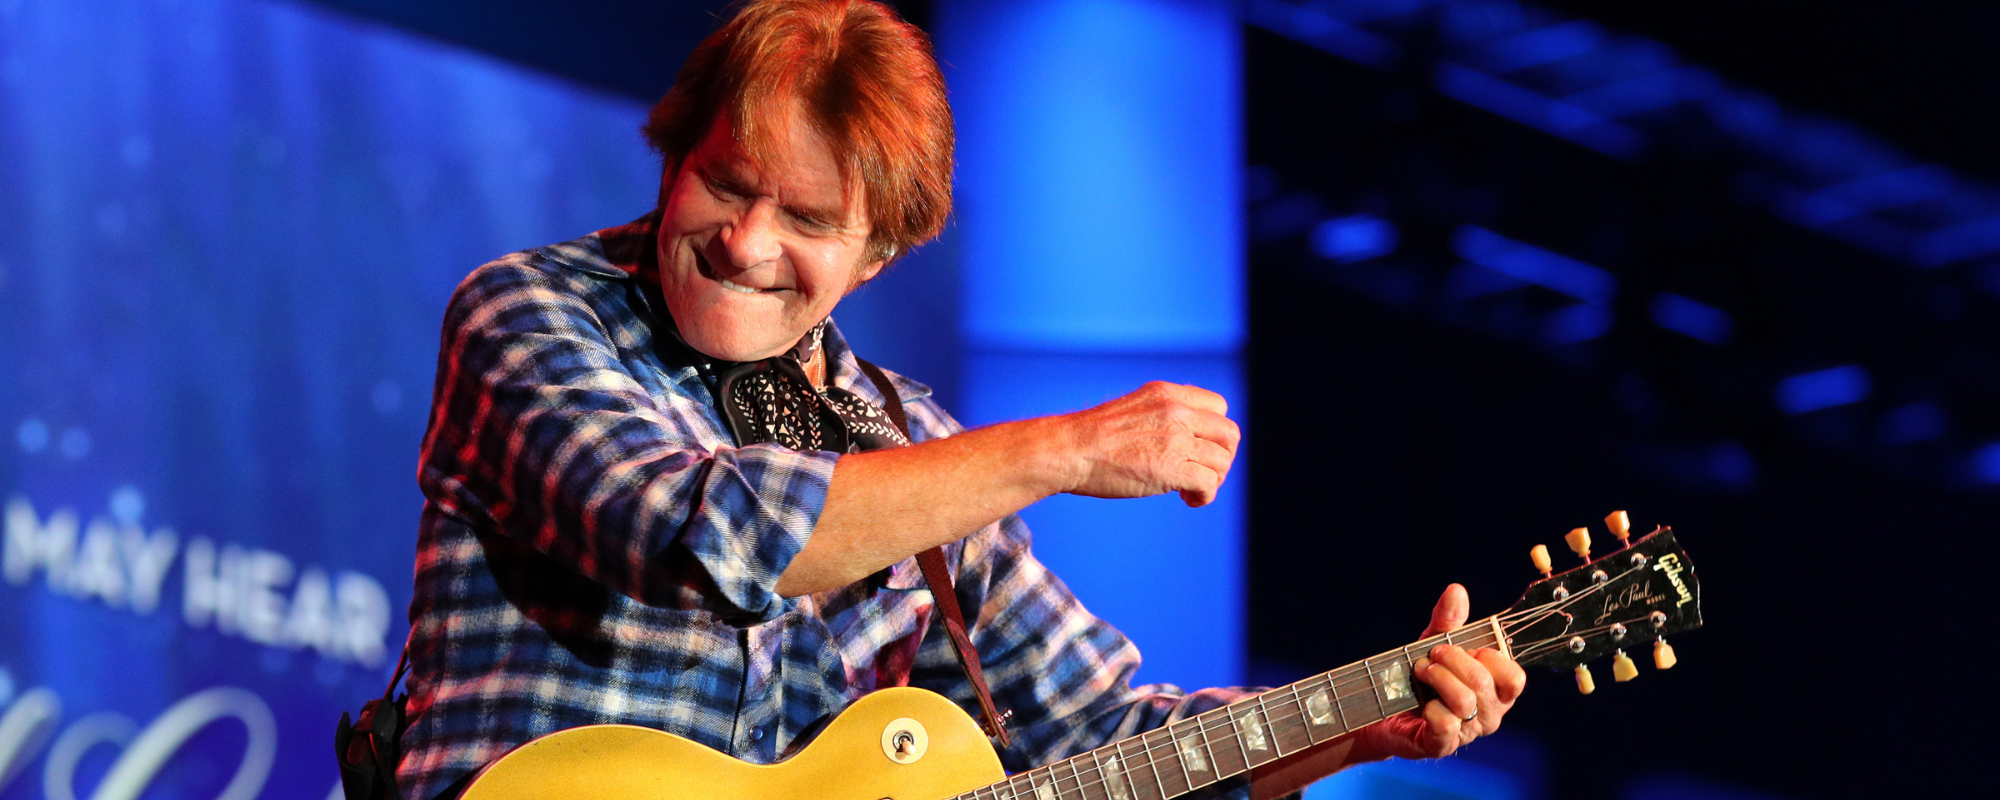 john fogerty performing live onstage